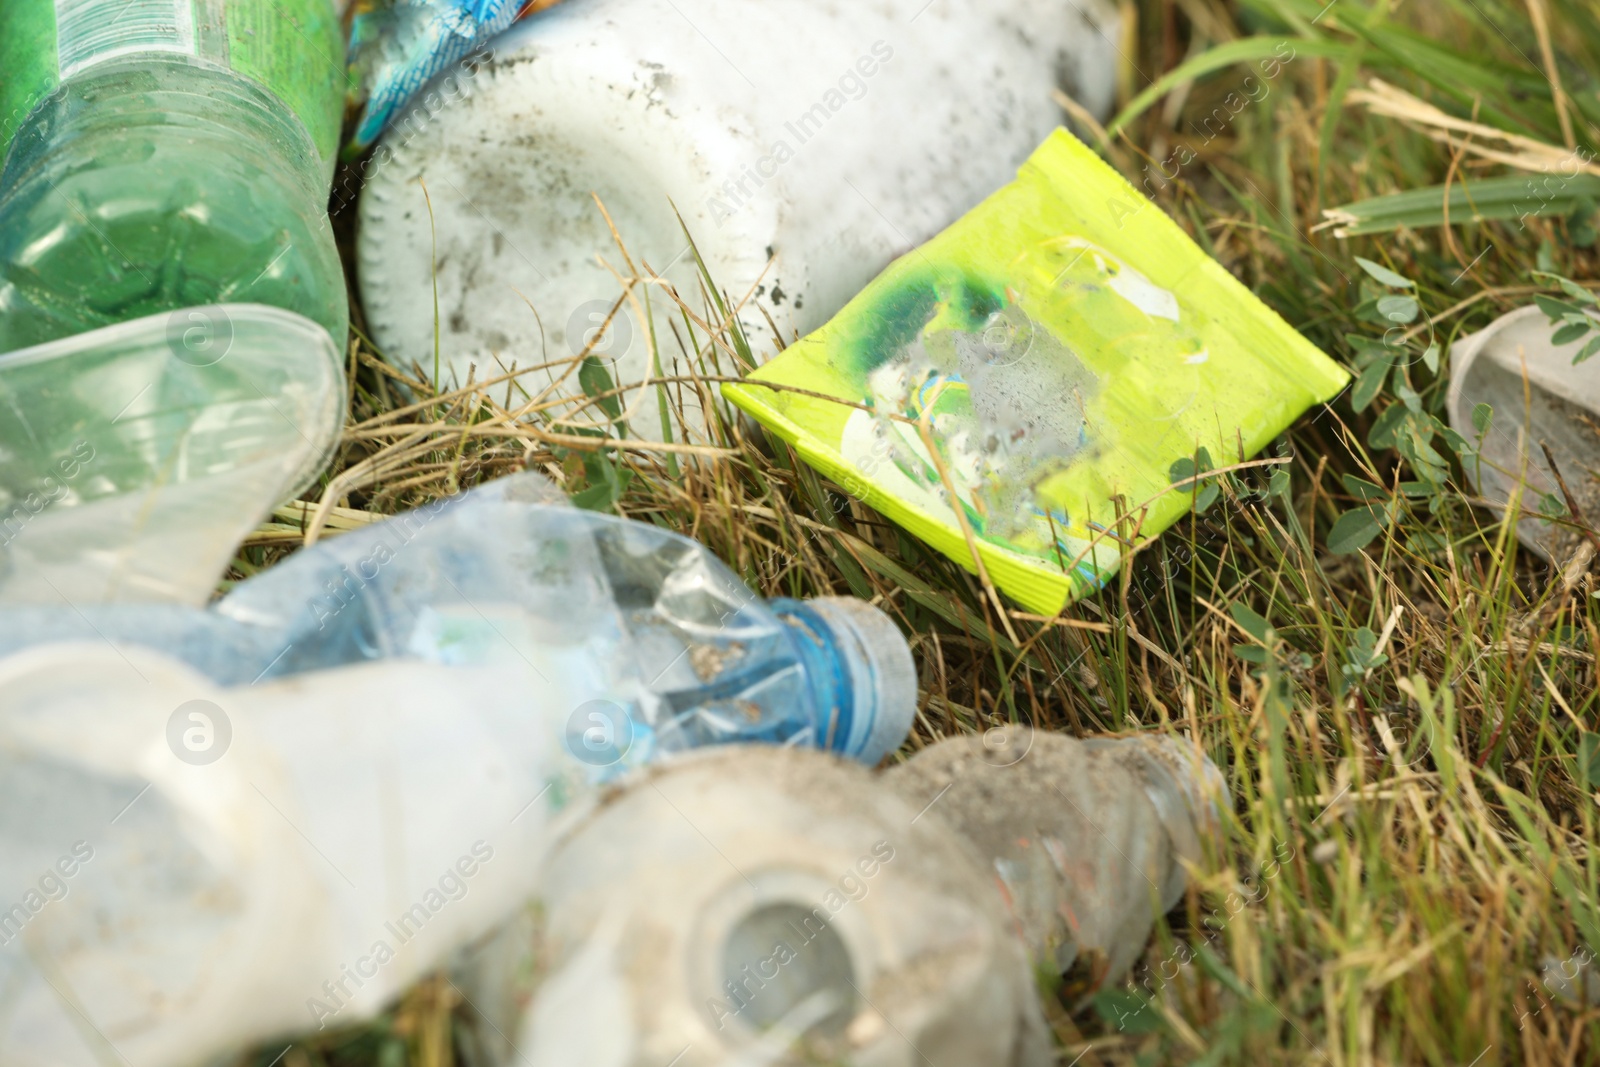 Photo of Garbage scattered on grass, closeup. Environment pollution problem